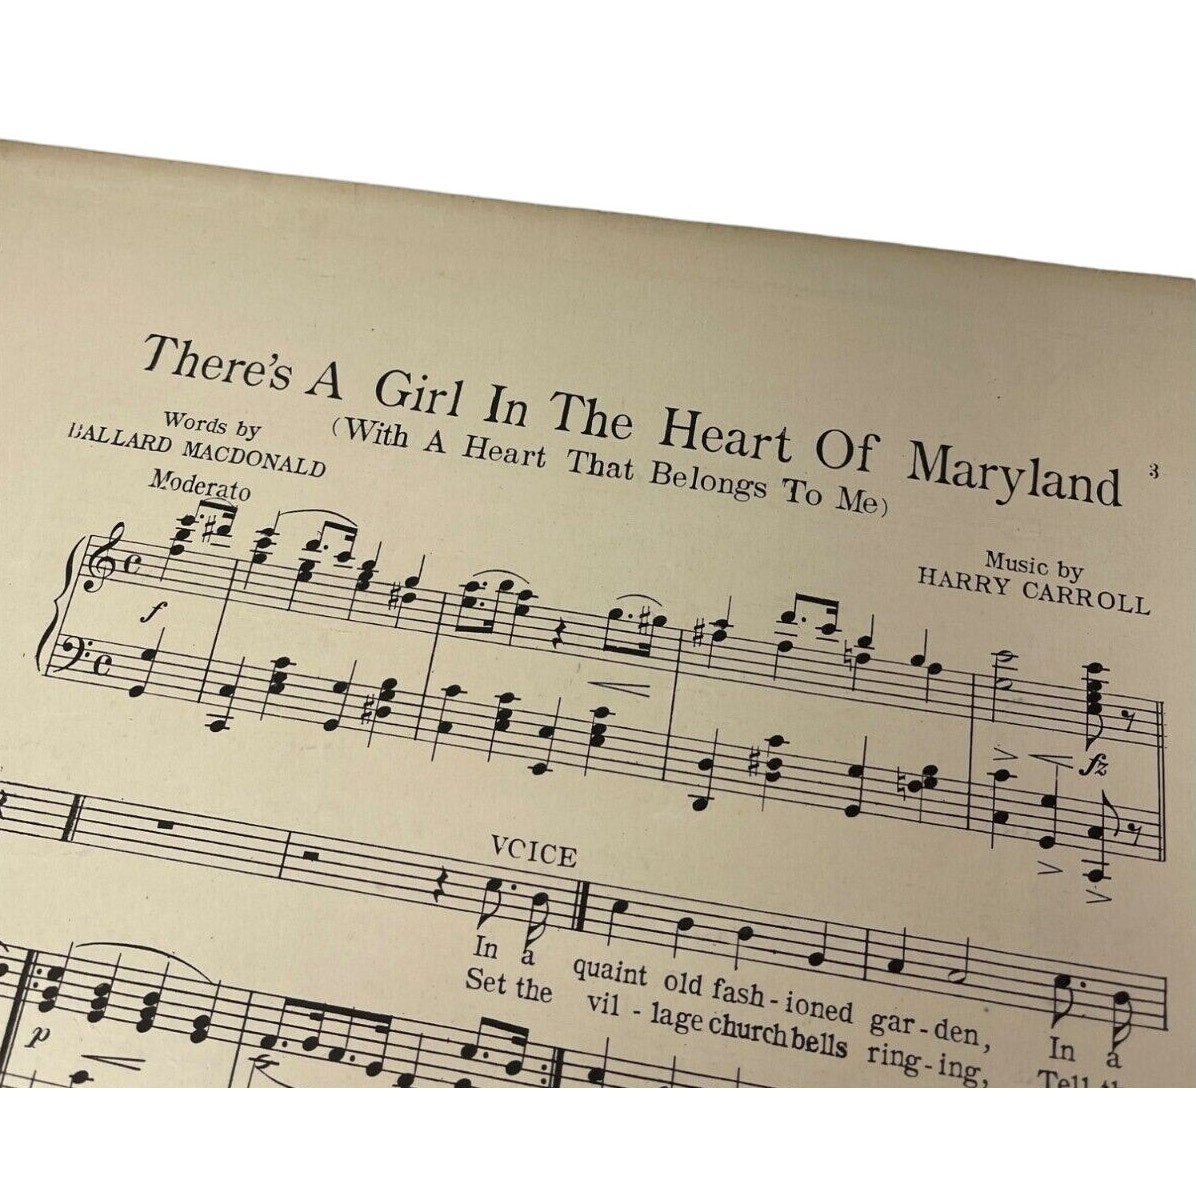 Theres A Girl In The Heart Of Maryland Sheet Music 1913 B Macdonald H Carroll